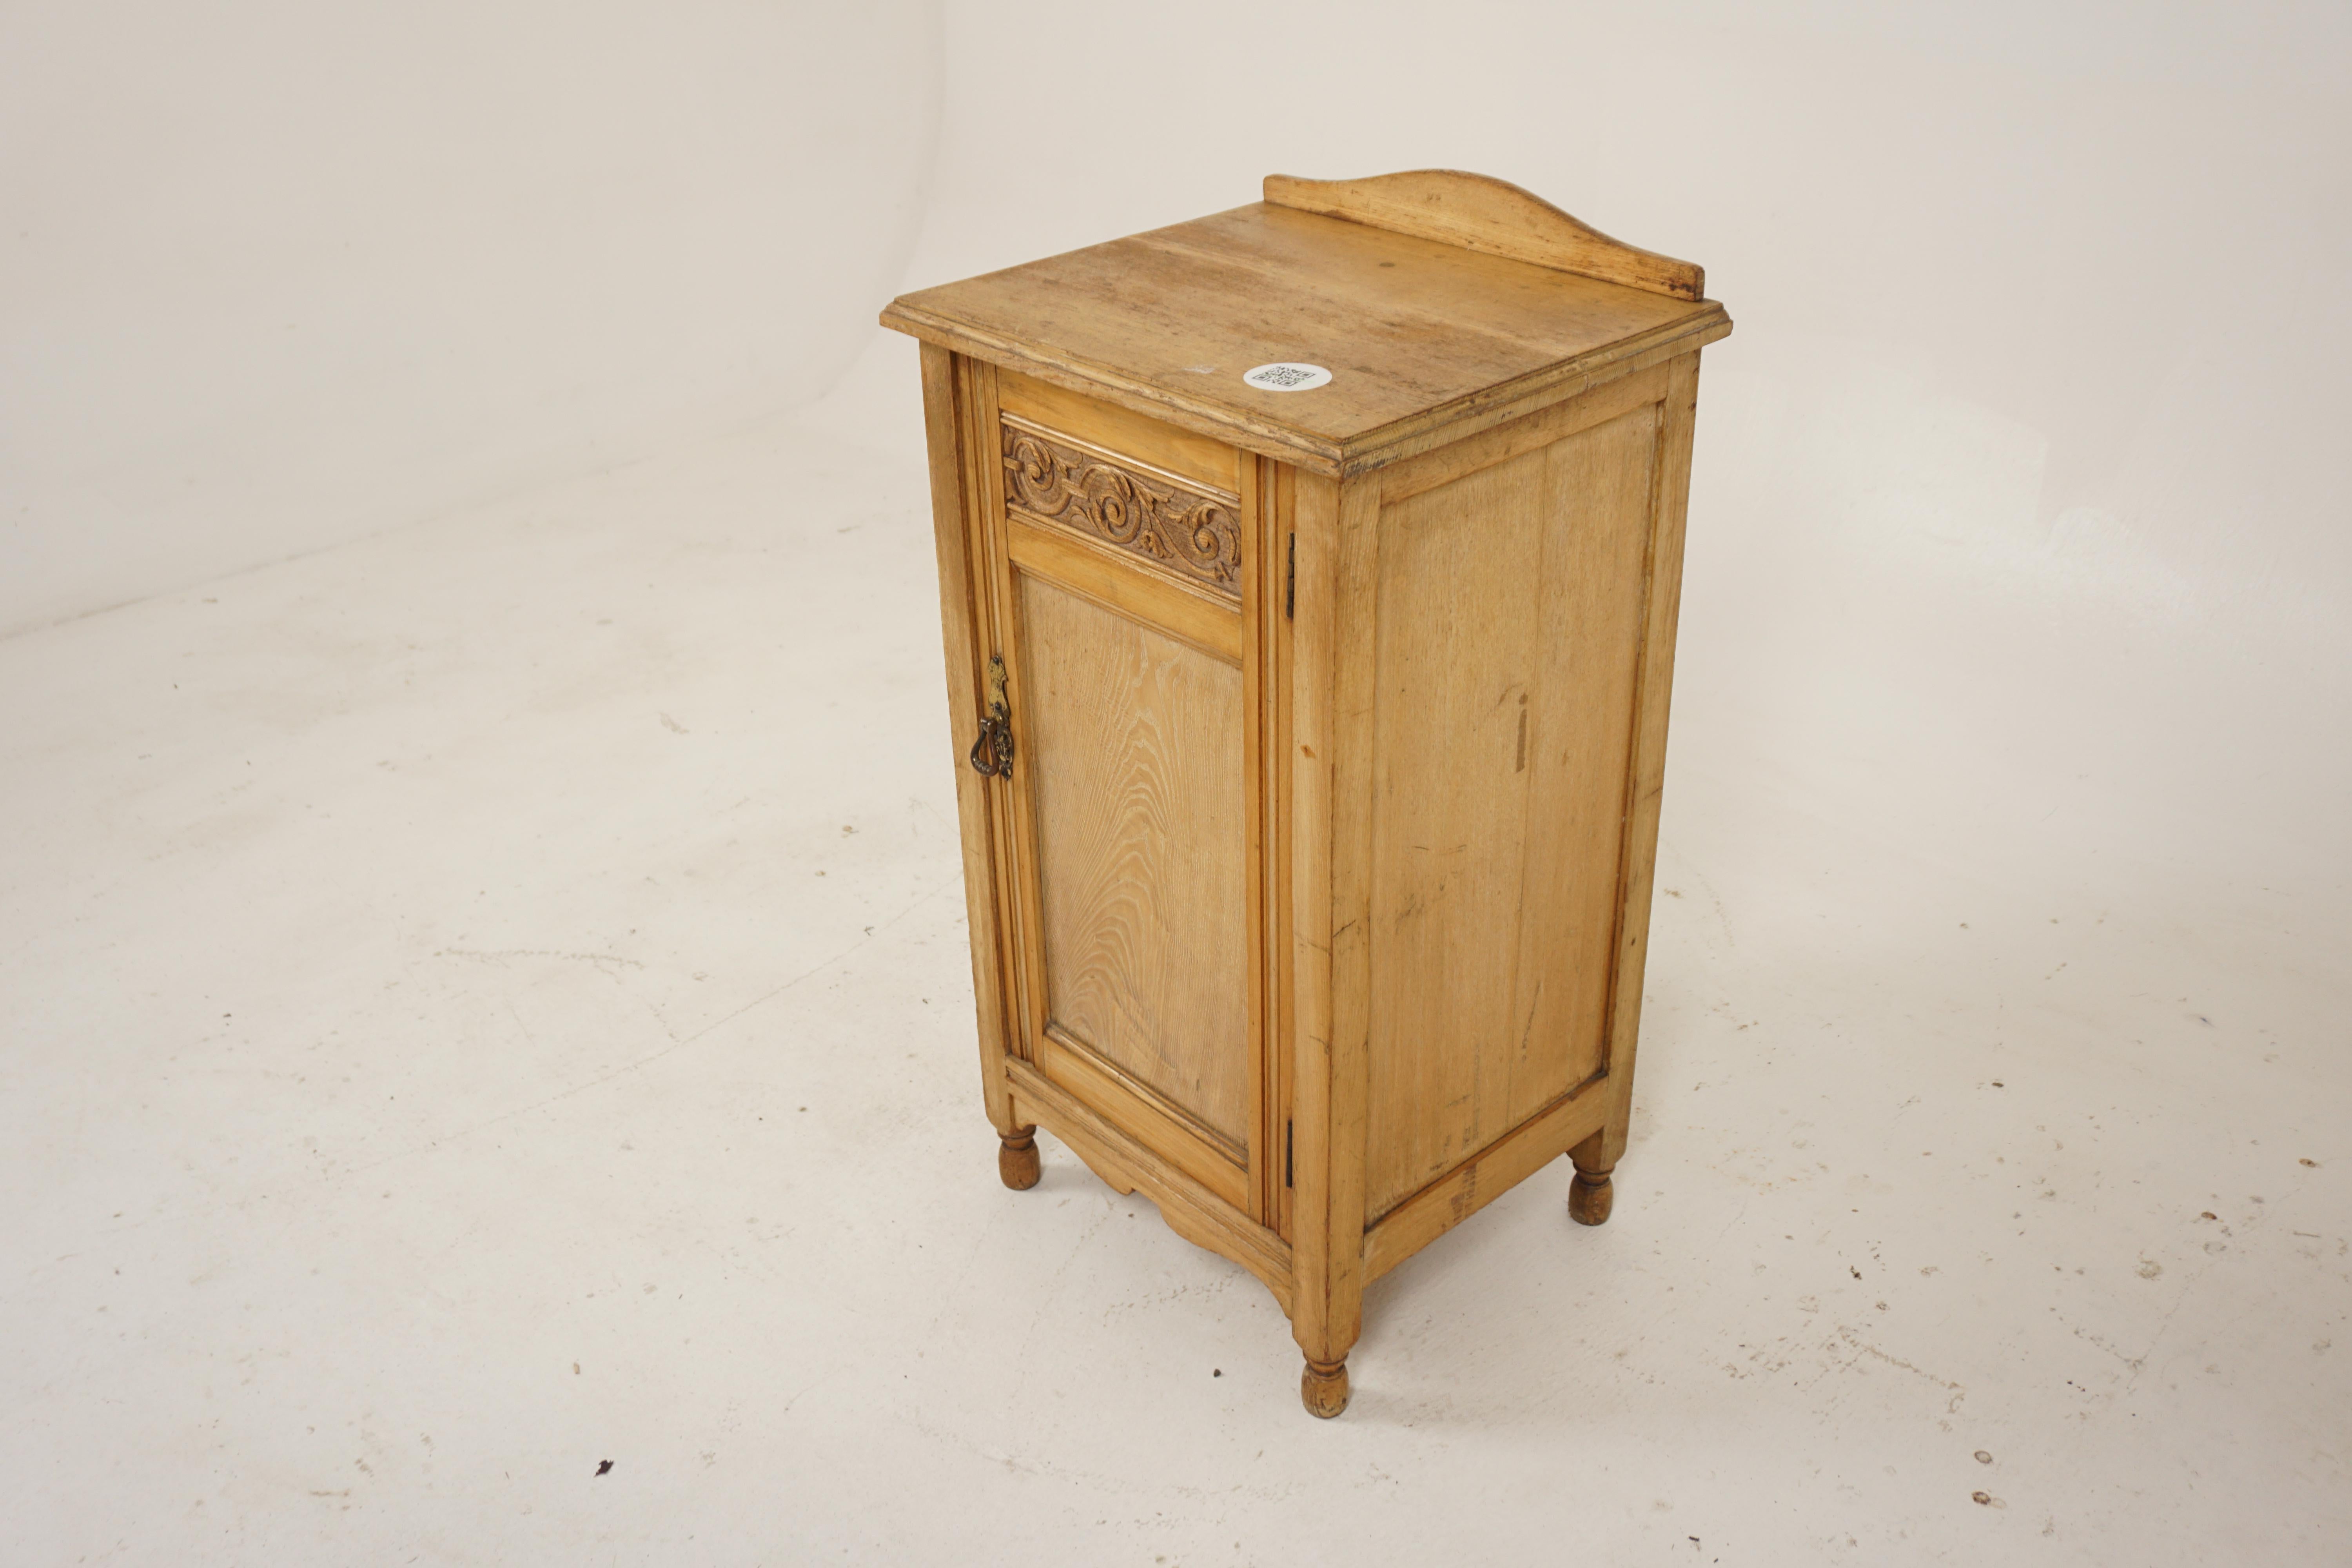 Ant. Victorian Ash Nightstand, Bedside Lamp Table, Scotland 1880, H725

Scotland 1880
Solid Ash
Original Finish
Pediment on back
Rectangular top
Single panelled door with carving
Opens to reveal single fixed shelf
Original hardware on the door
Some